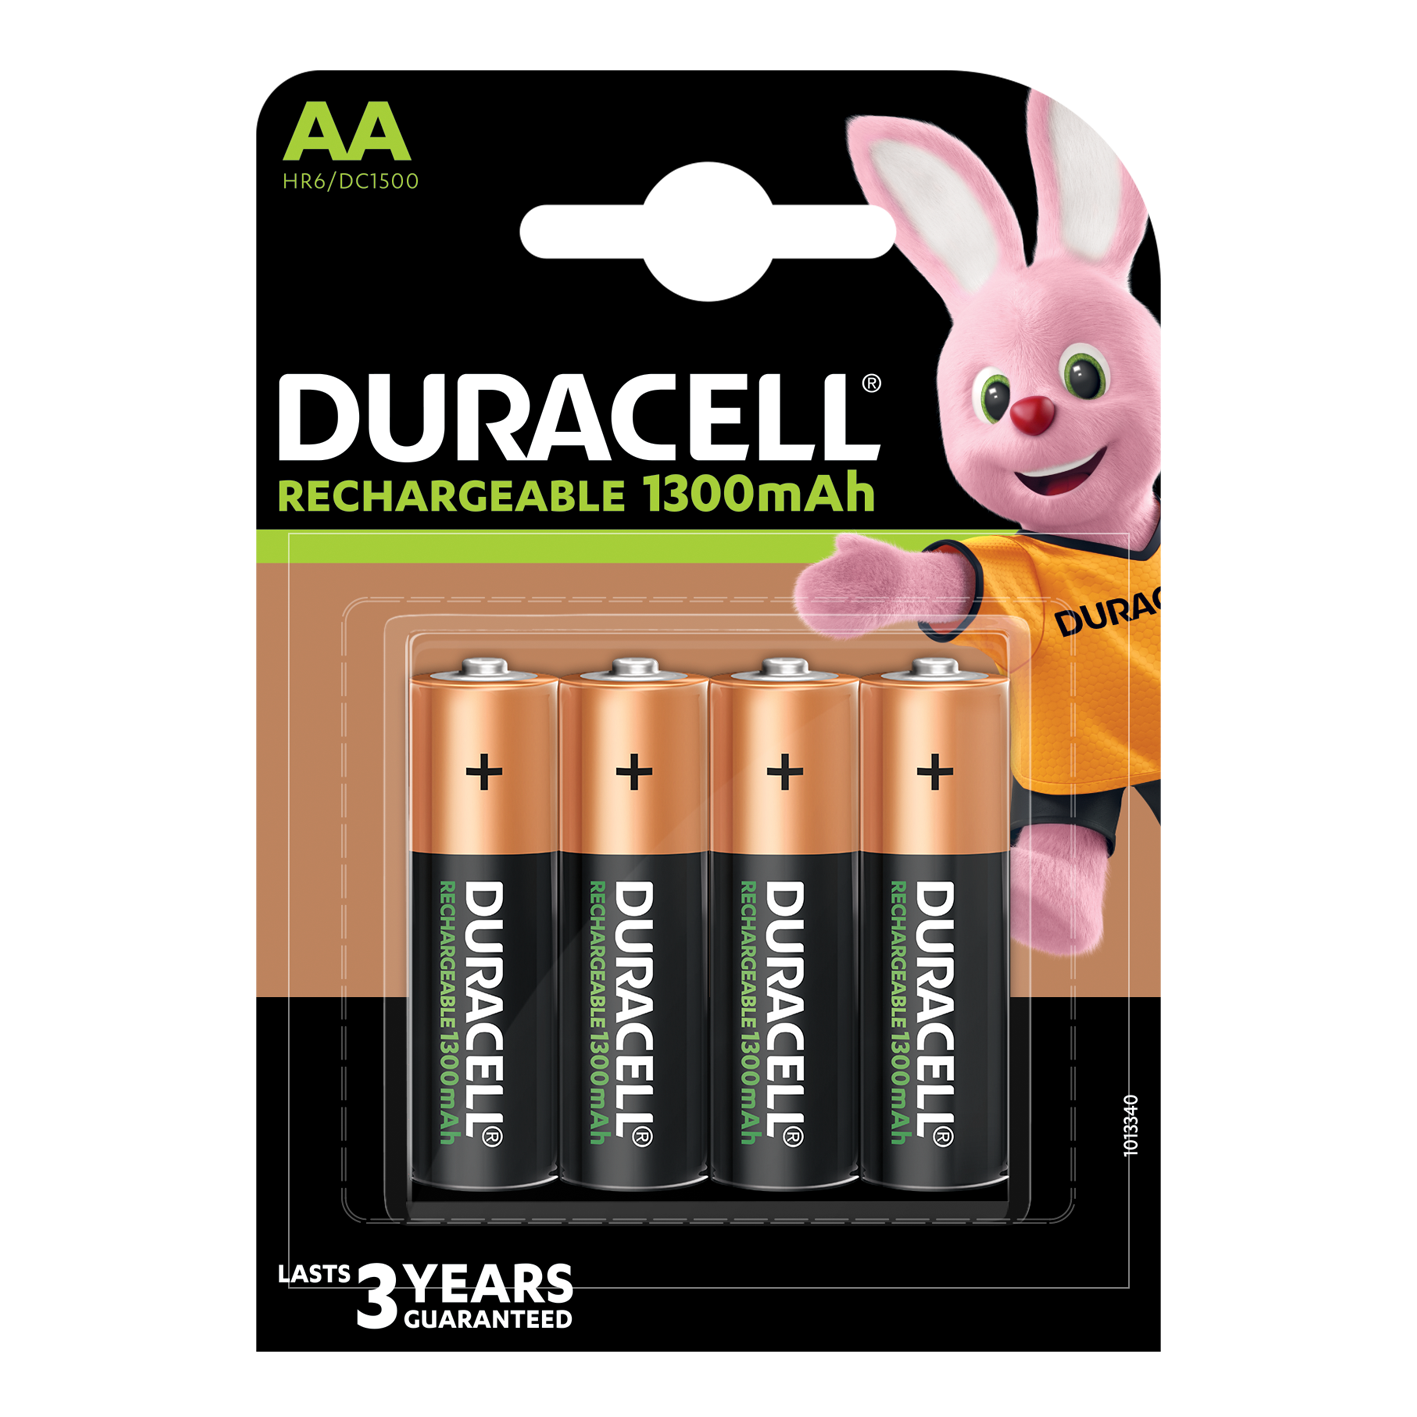 Duracell AA 1300mAh Recharge, Pack of 4